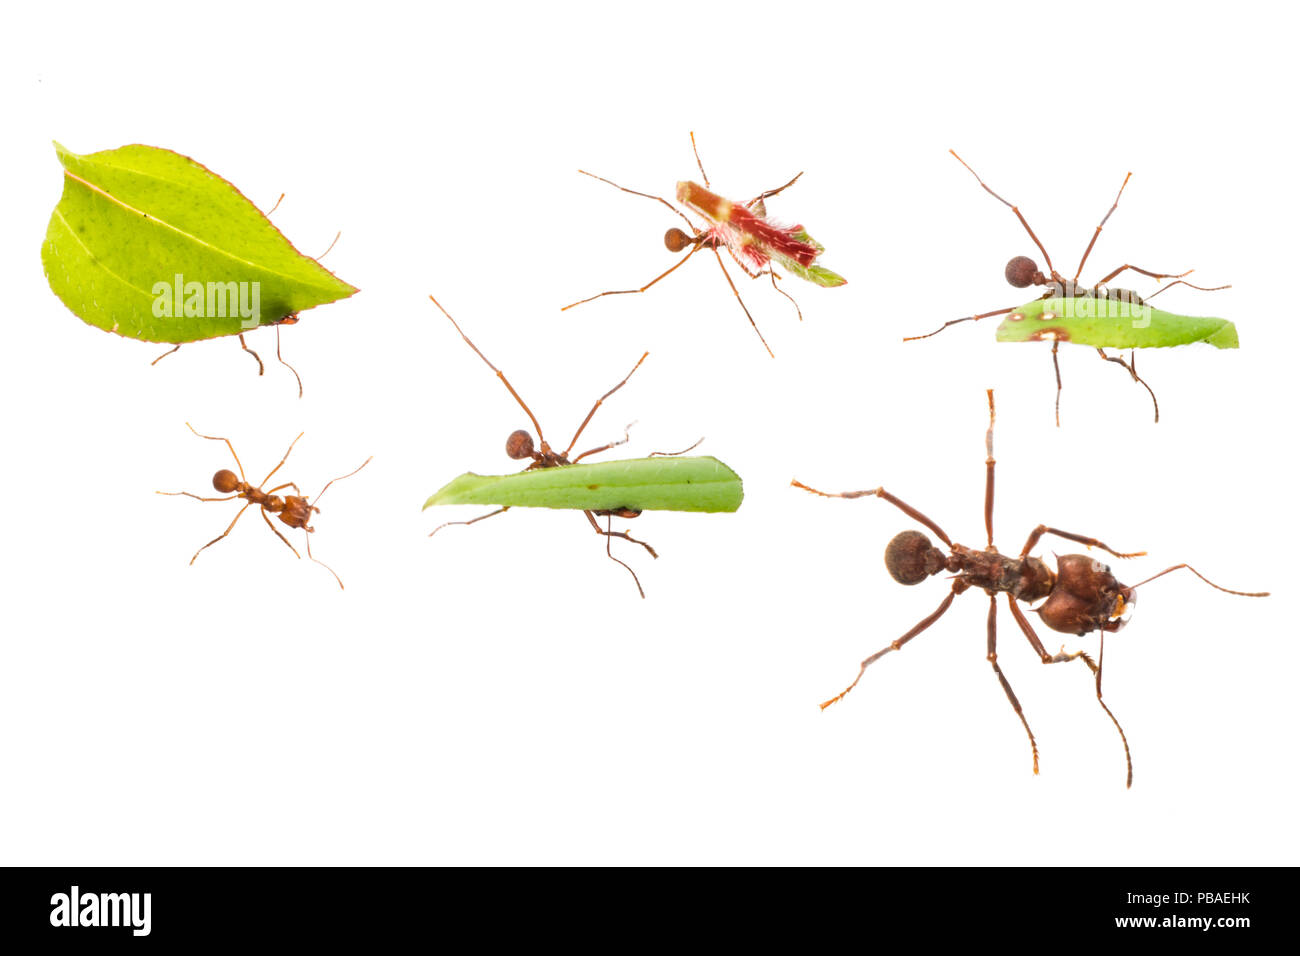 Leaf-cutter ants (Atta cephalotes) carrying pieces of leaf that they have harvested back to their underground fungus garden in their nest, Osa Peninsula, Costa Rica. Photographed in mobile field studio on a white background. Digital composite image Stock Photo